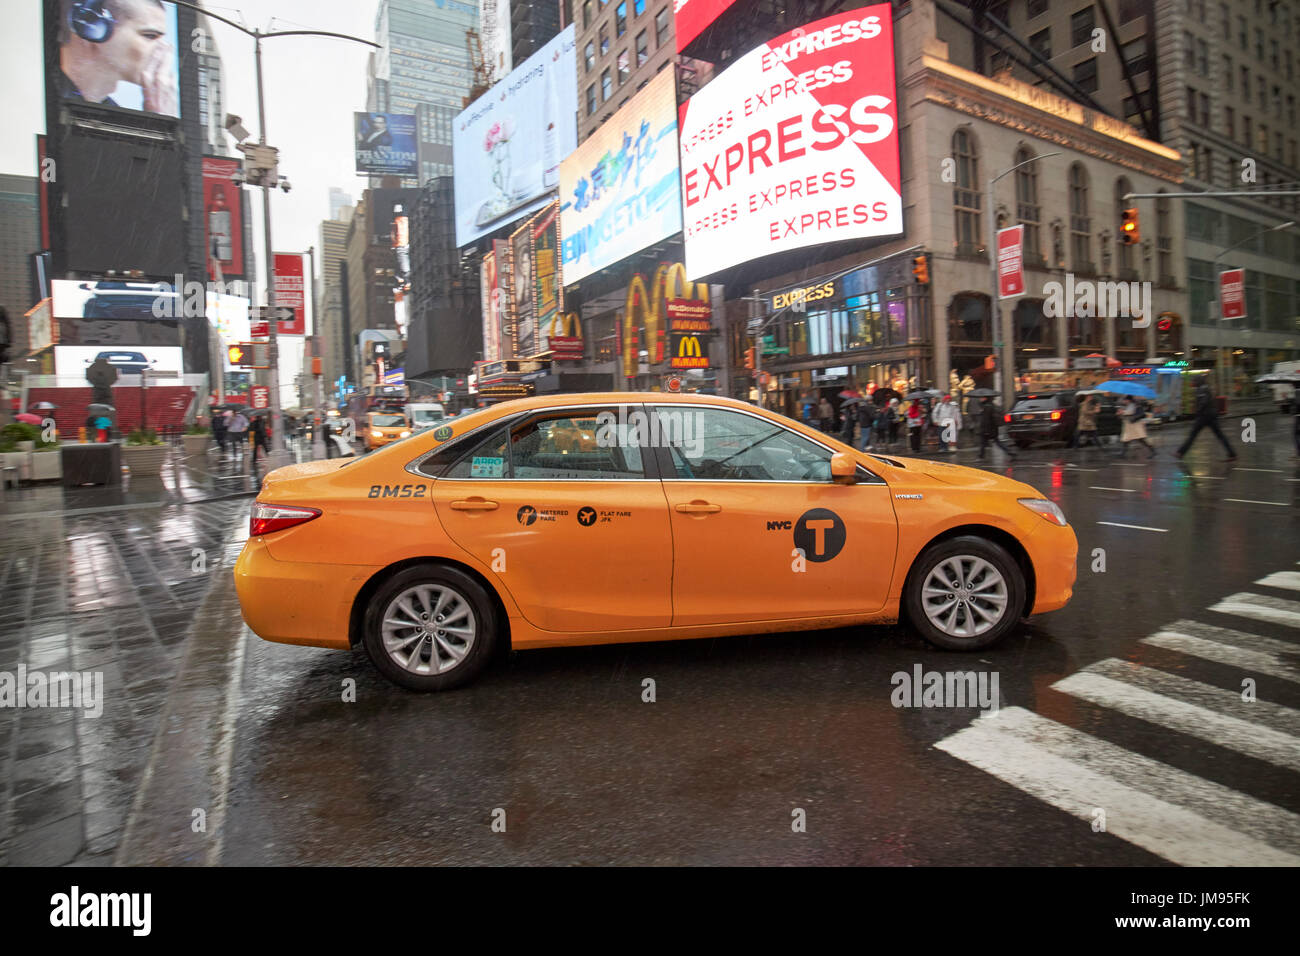 Toyota Camry hybride 2008 new york taxi jaune traverser Times square sous la pluie New York USA Banque D'Images